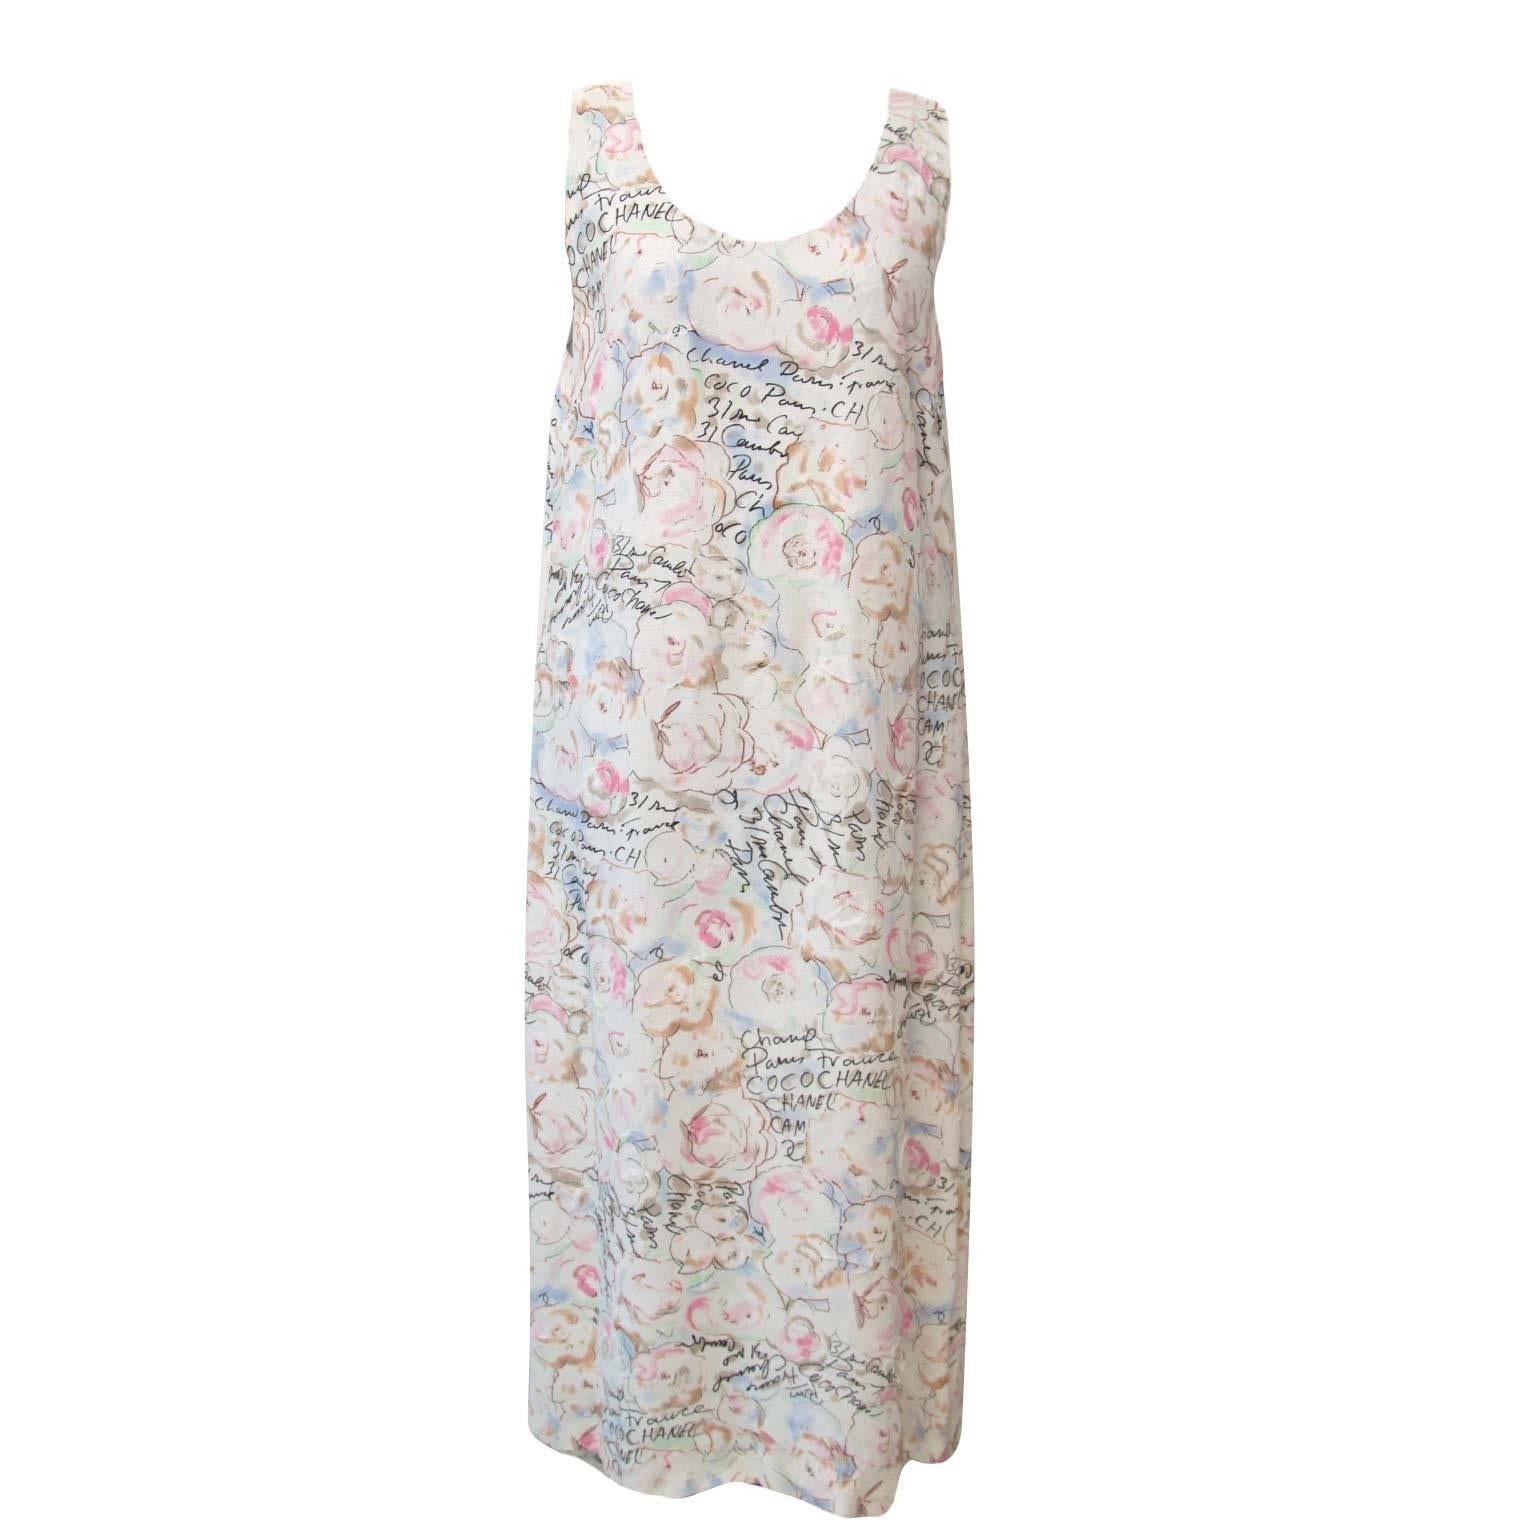 Gray Chanel Pastels Floral Text Dress 